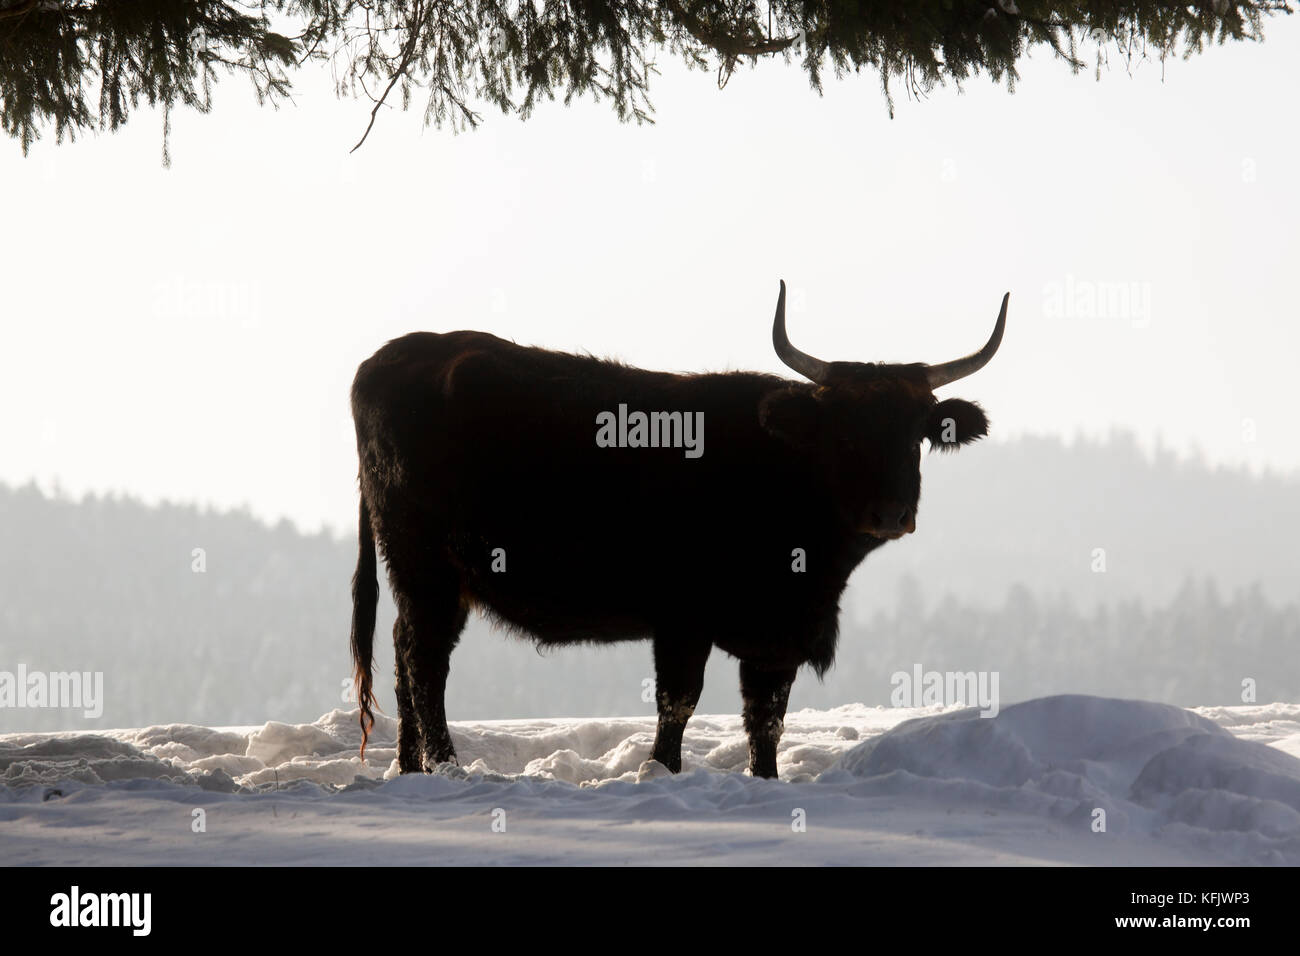 Heck cattle (Bos domesticus) bull in the snow in winter Stock Photo